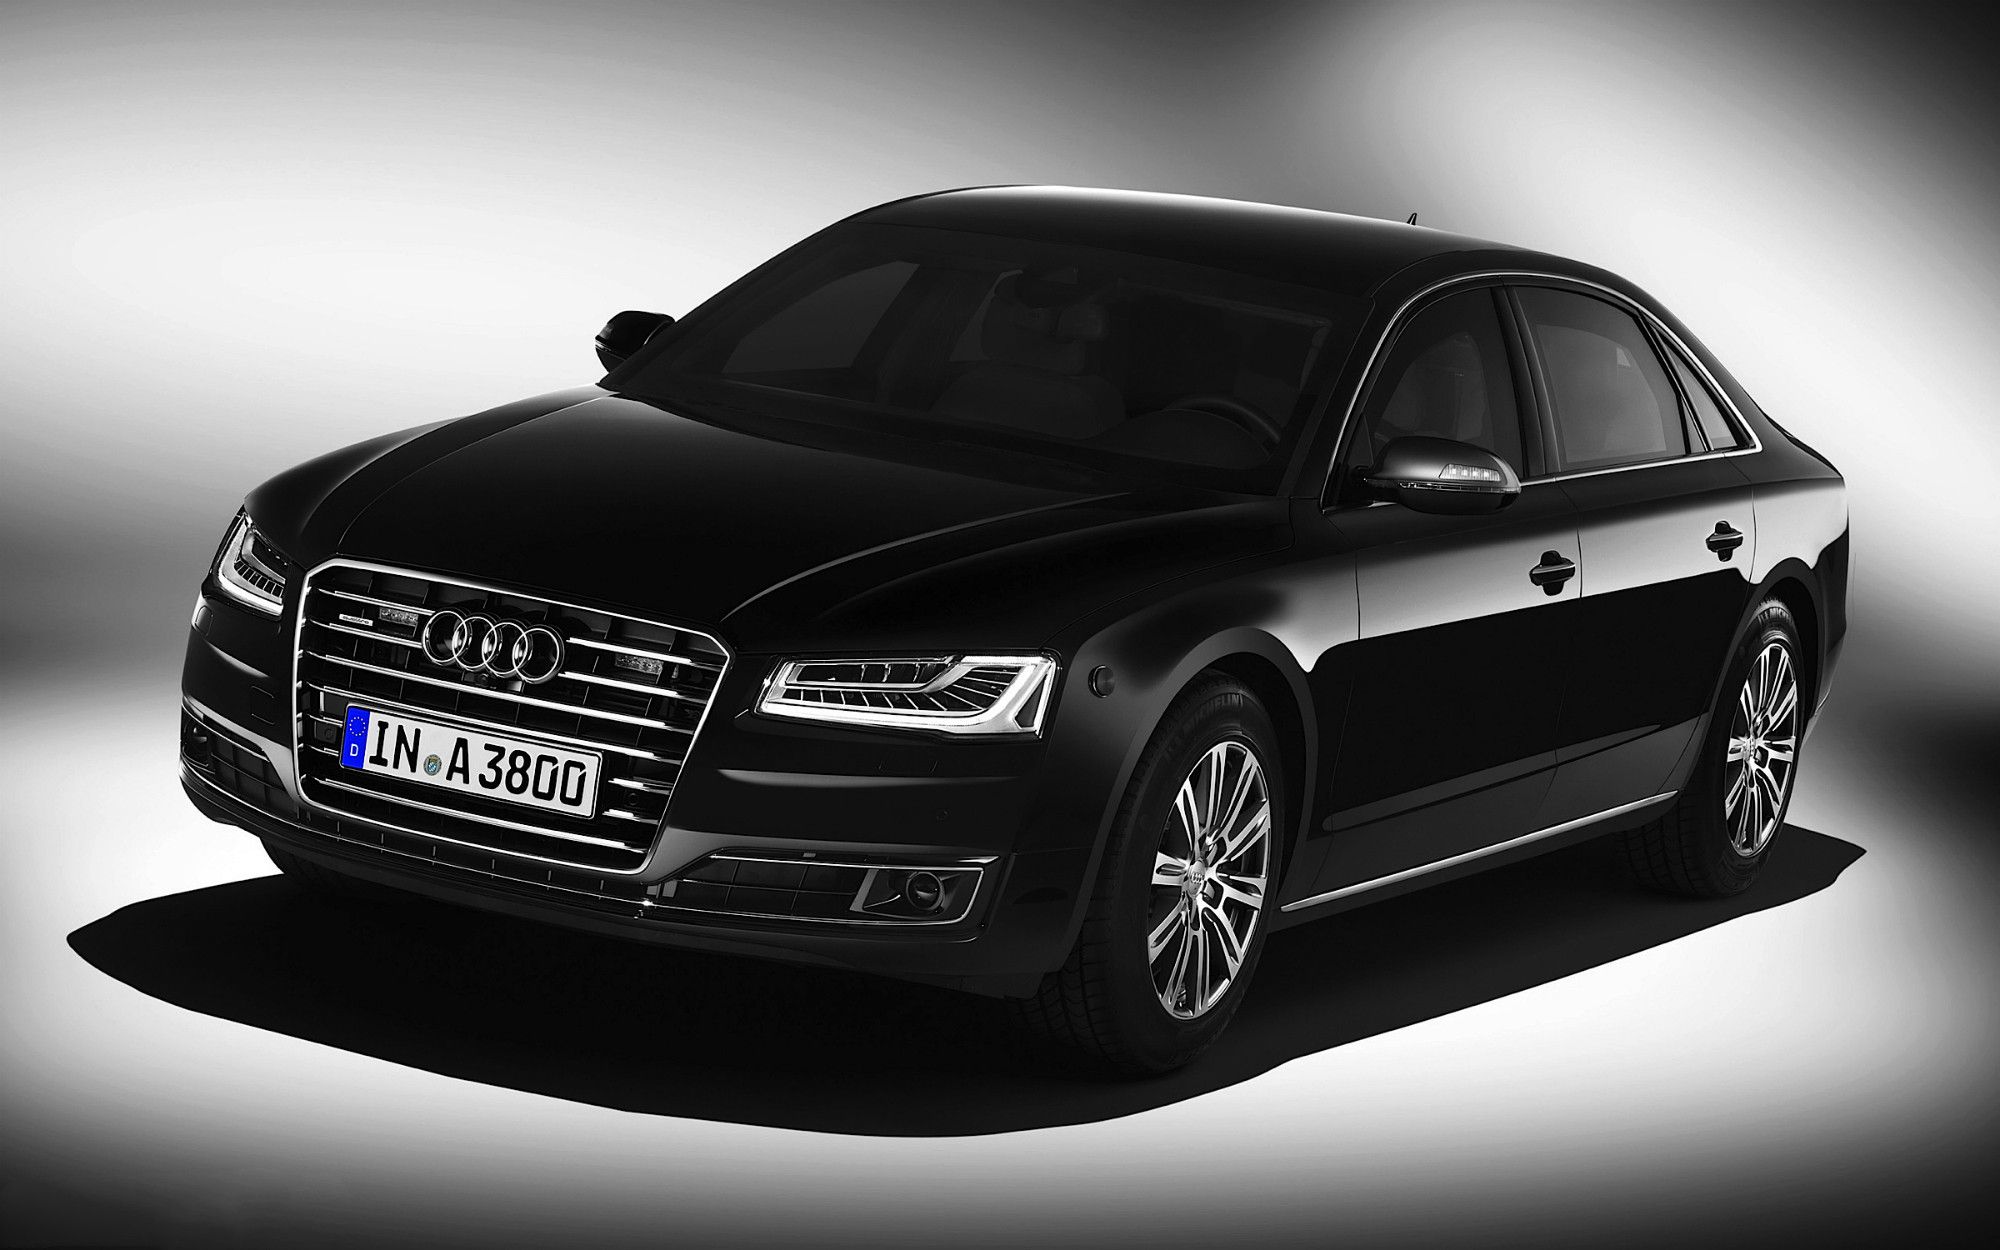 Audi A8 L Security Wallpaper Wide Or HD Cars